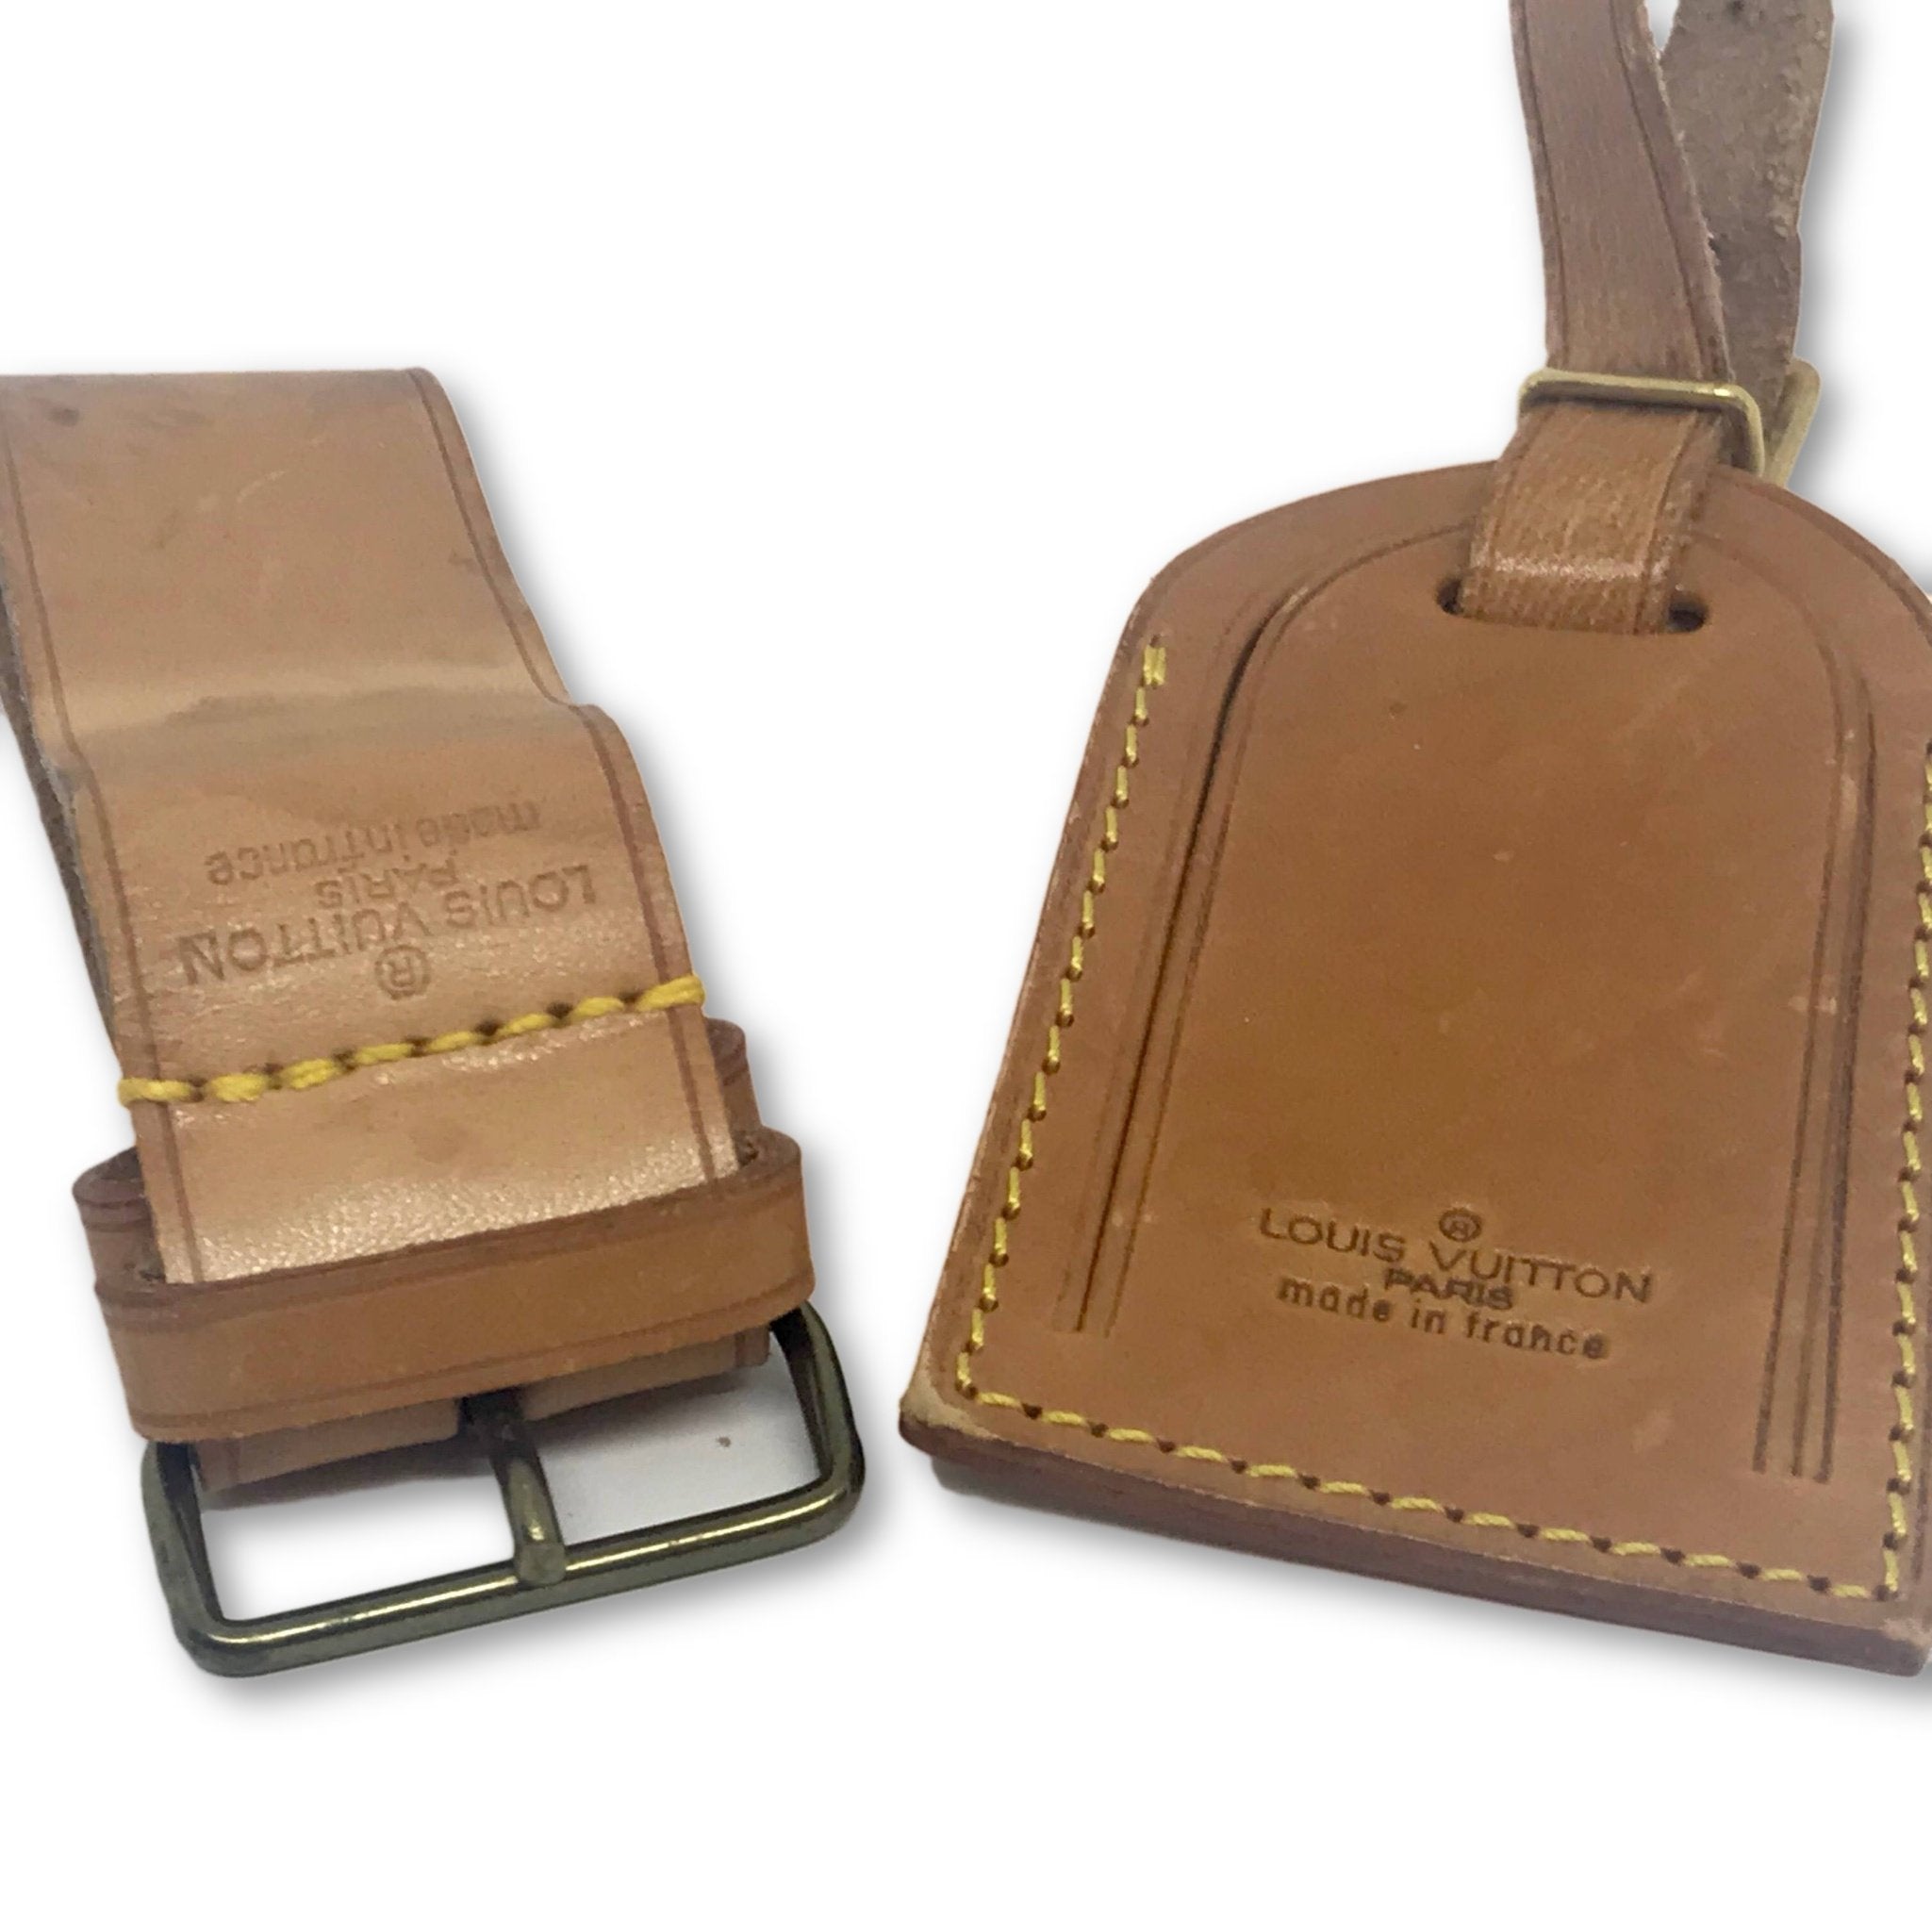 New in: Personalized luggage tag from Louis Vuitton – Buy the